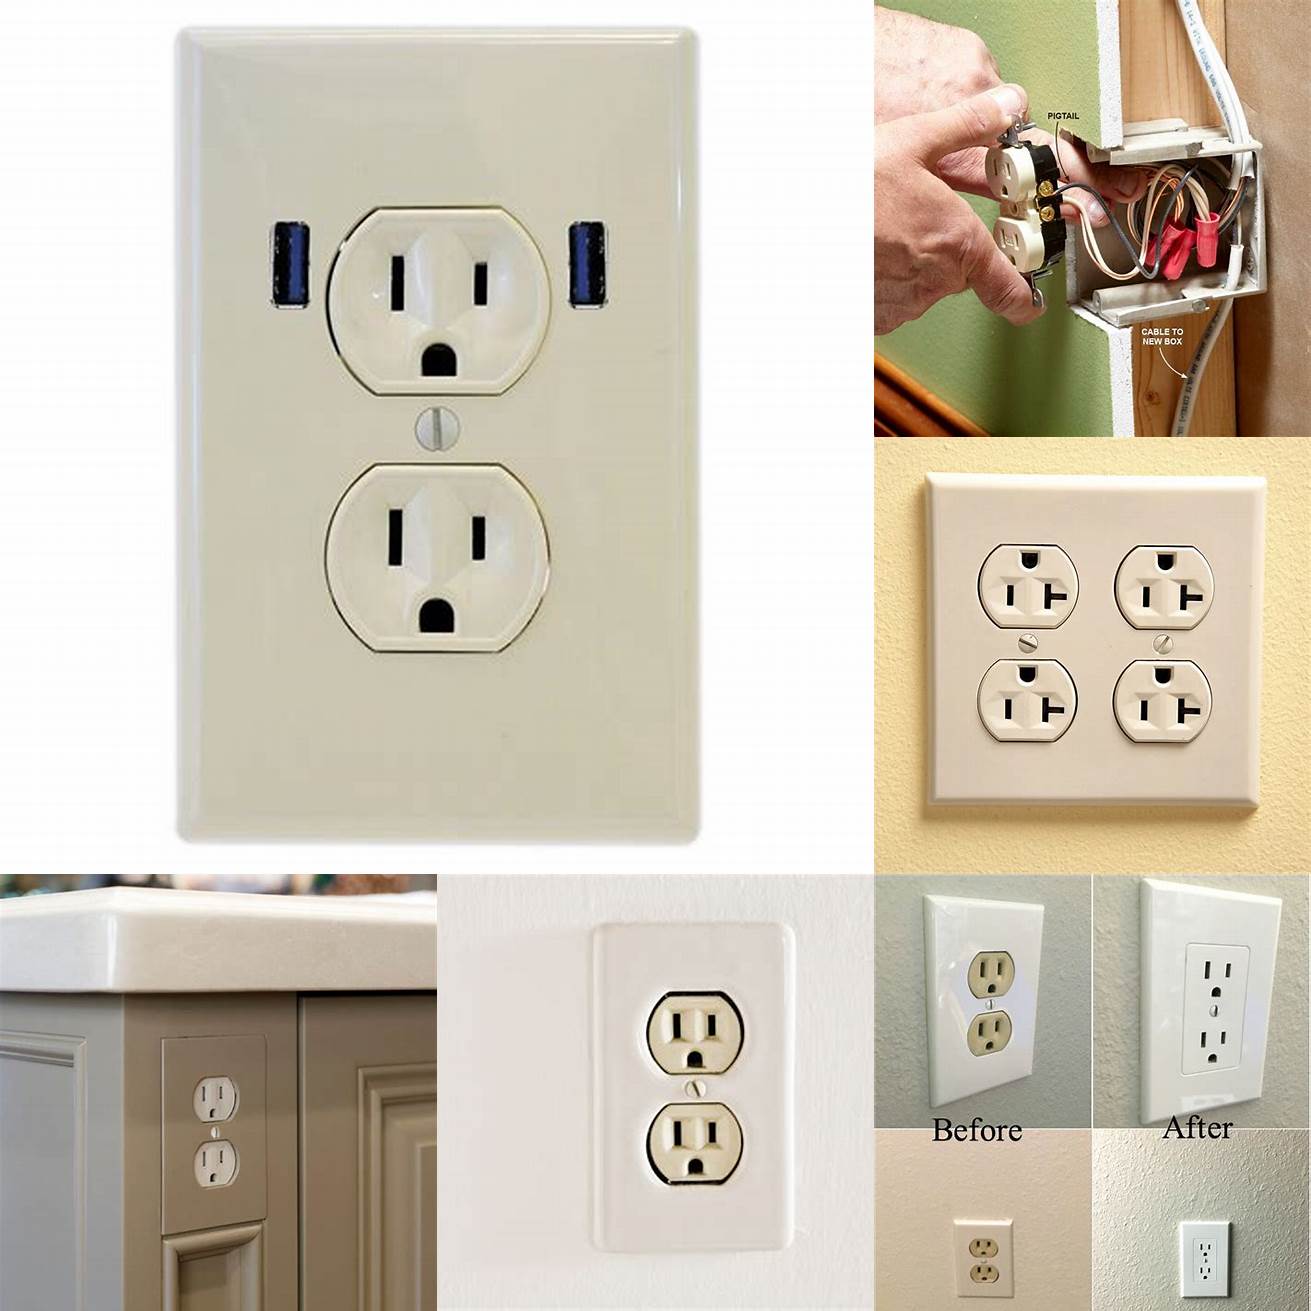 Built-in electrical outlets